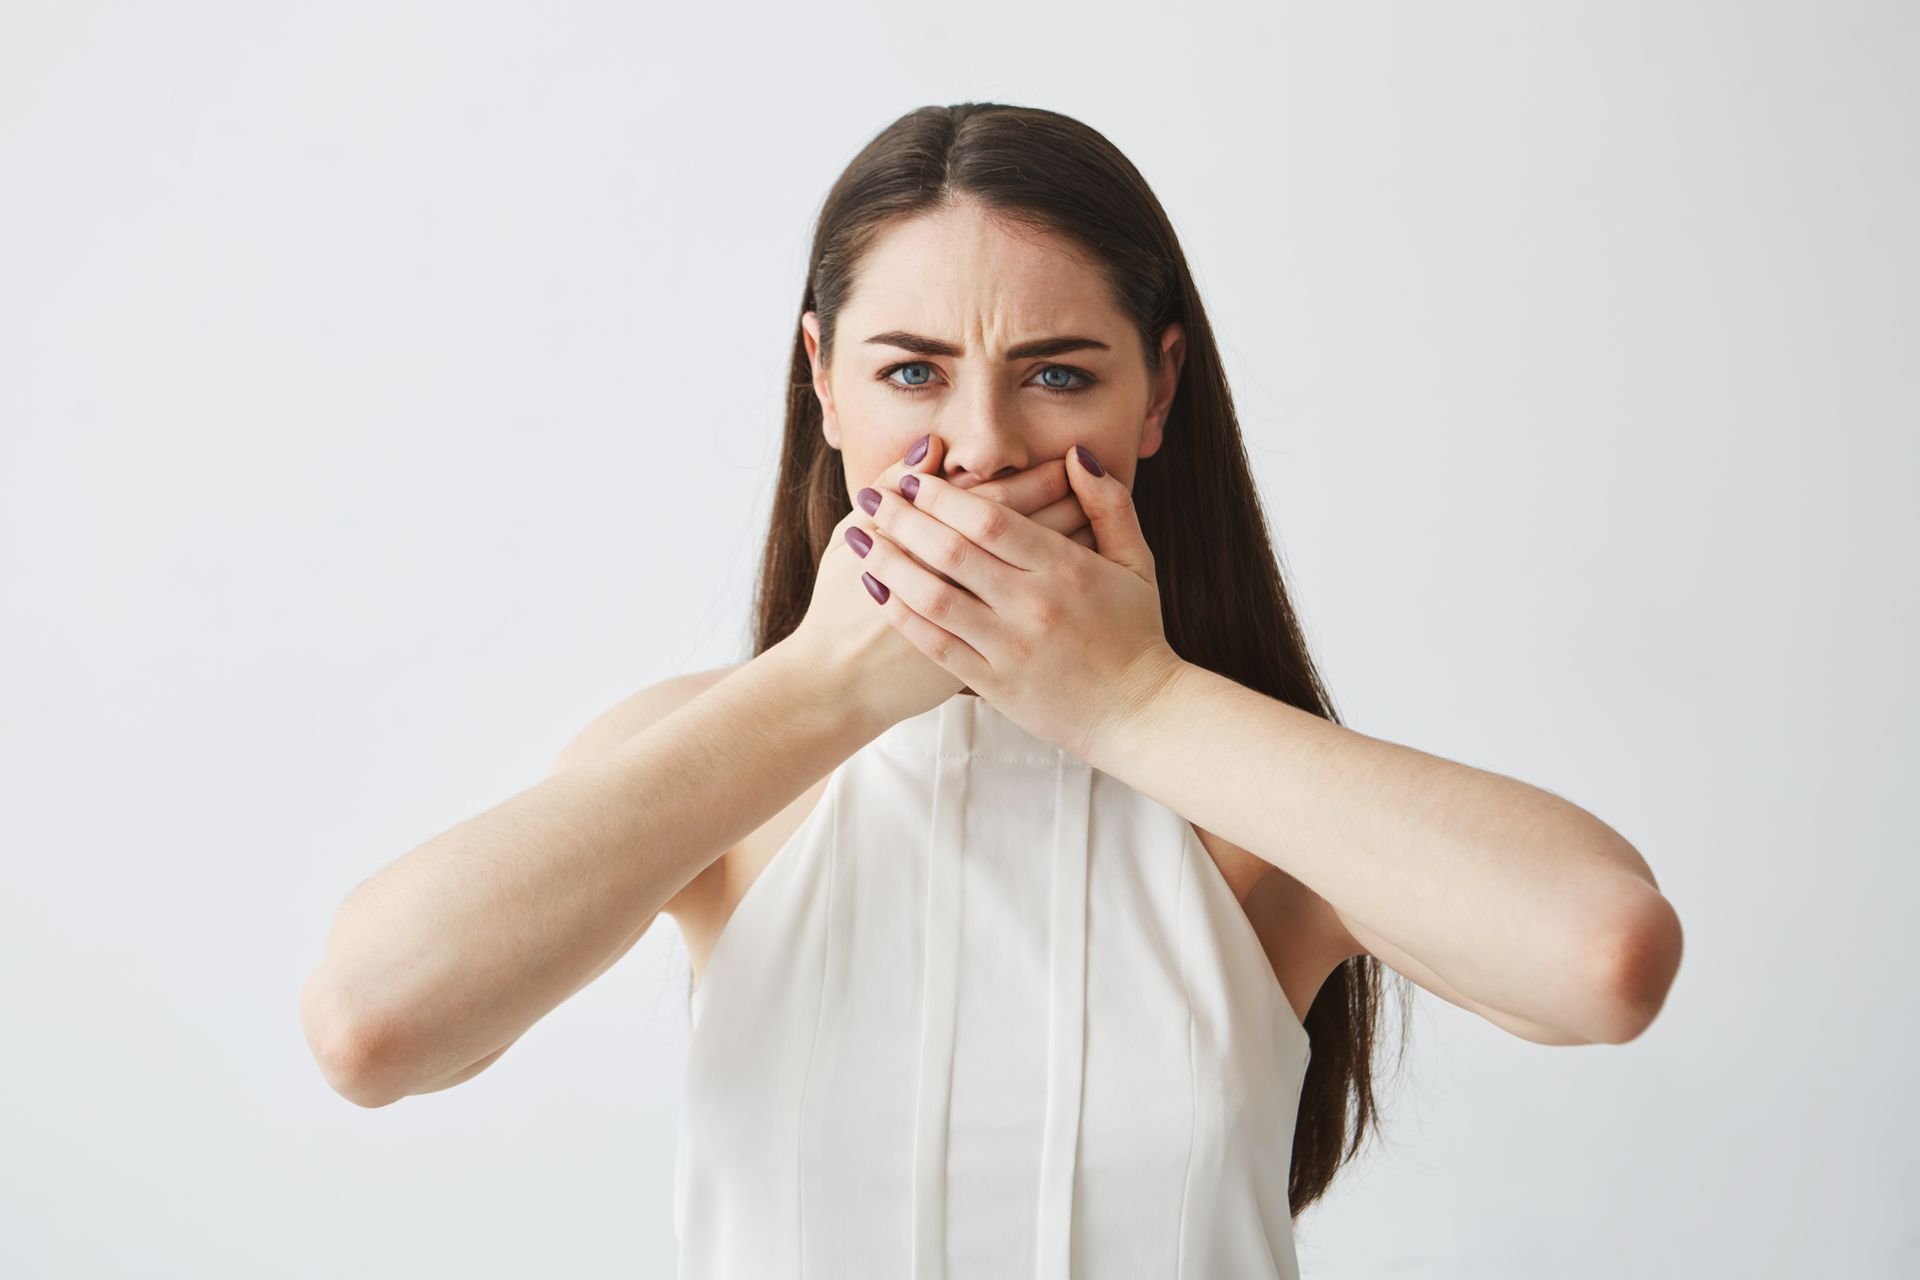 Why Does My Breath Smell Bad Even After Brushing?